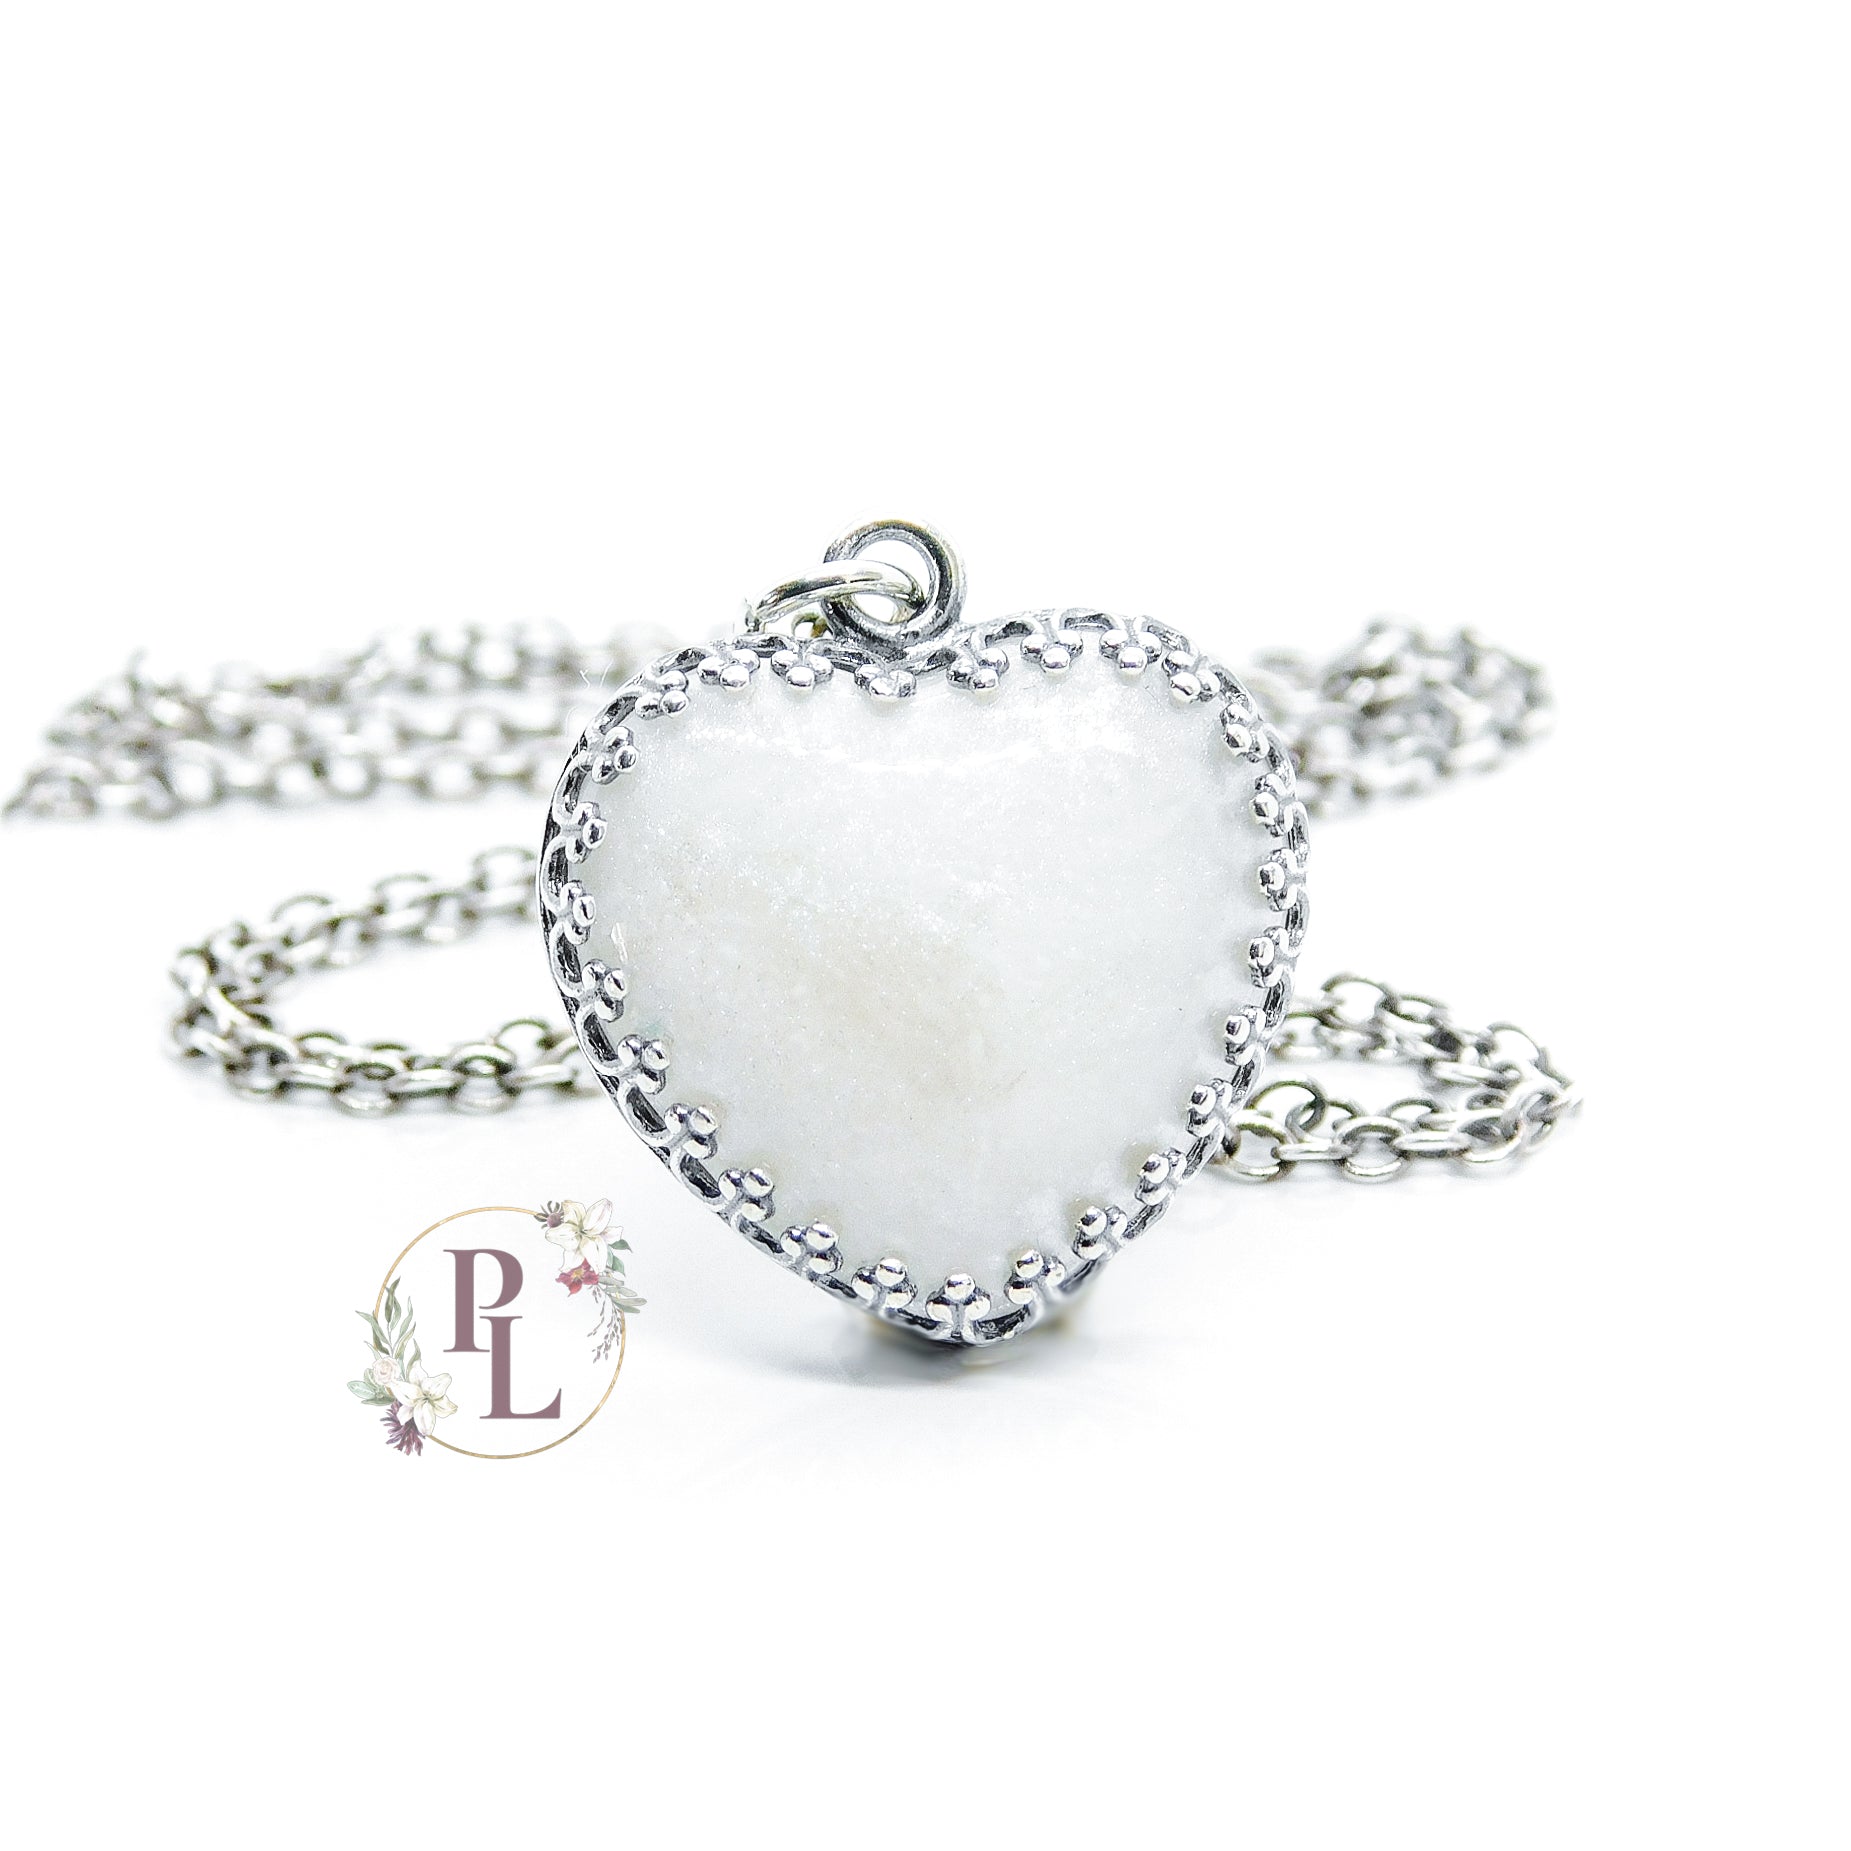 Adeline Crowned Heart Breastmilk Necklace by Pandora Lilly Keepsakes - A milky off-white heart shaped stone, encased in a 925 Sterling Silver setting with crowned edging, attached to an eighteen inch long curb chain.